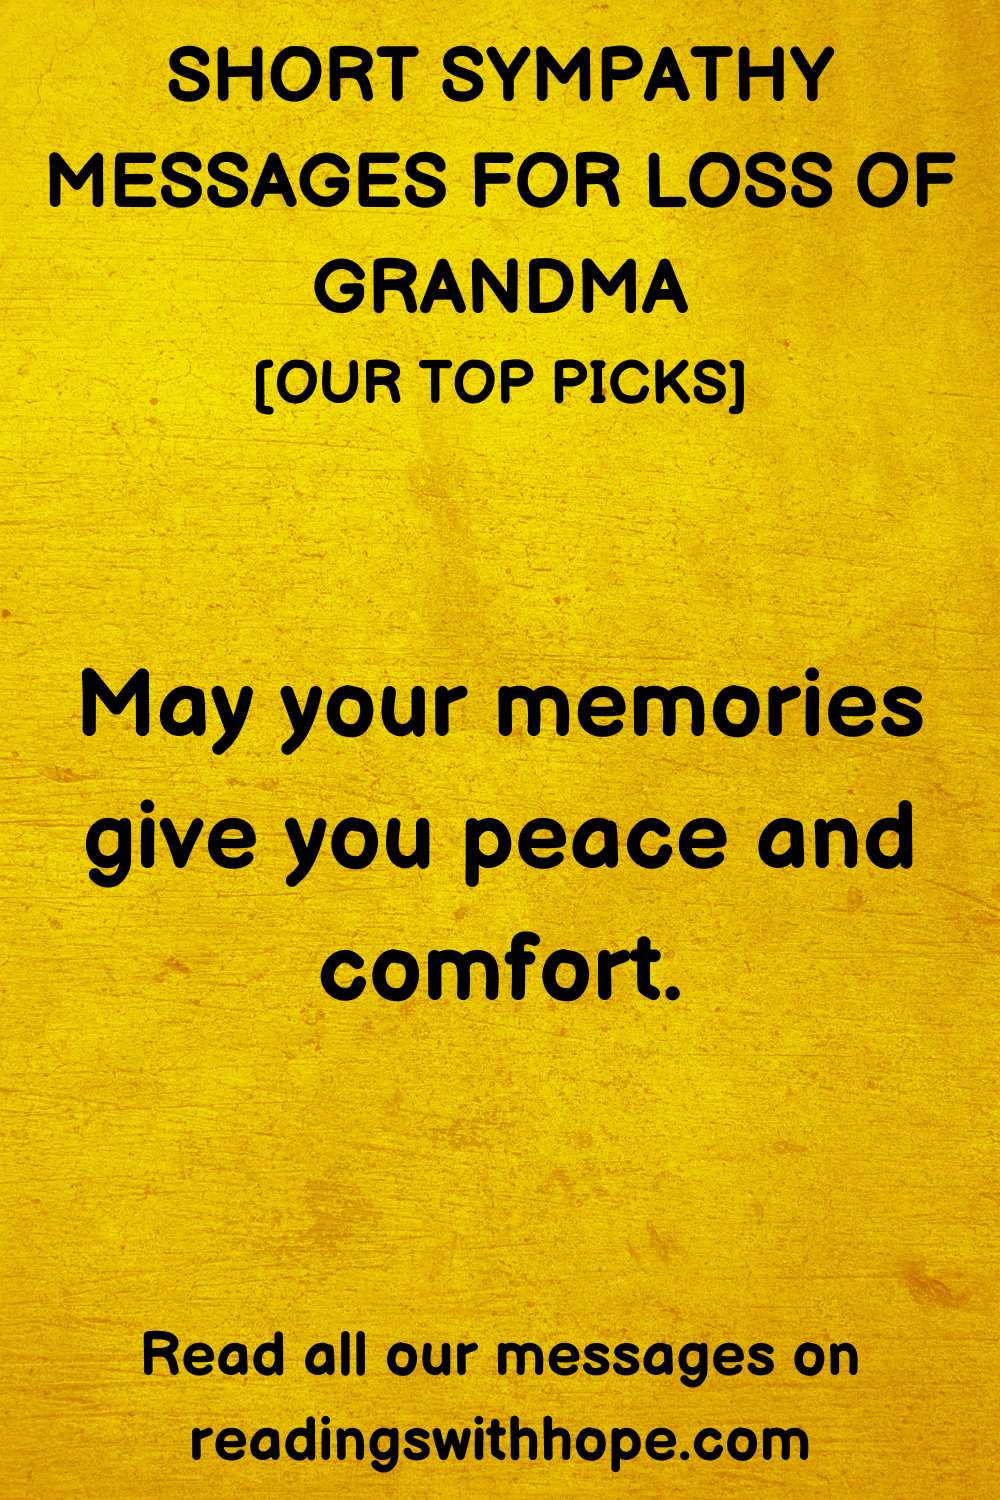 60 Condolences and Sympathy Messages for Loss of Grandma